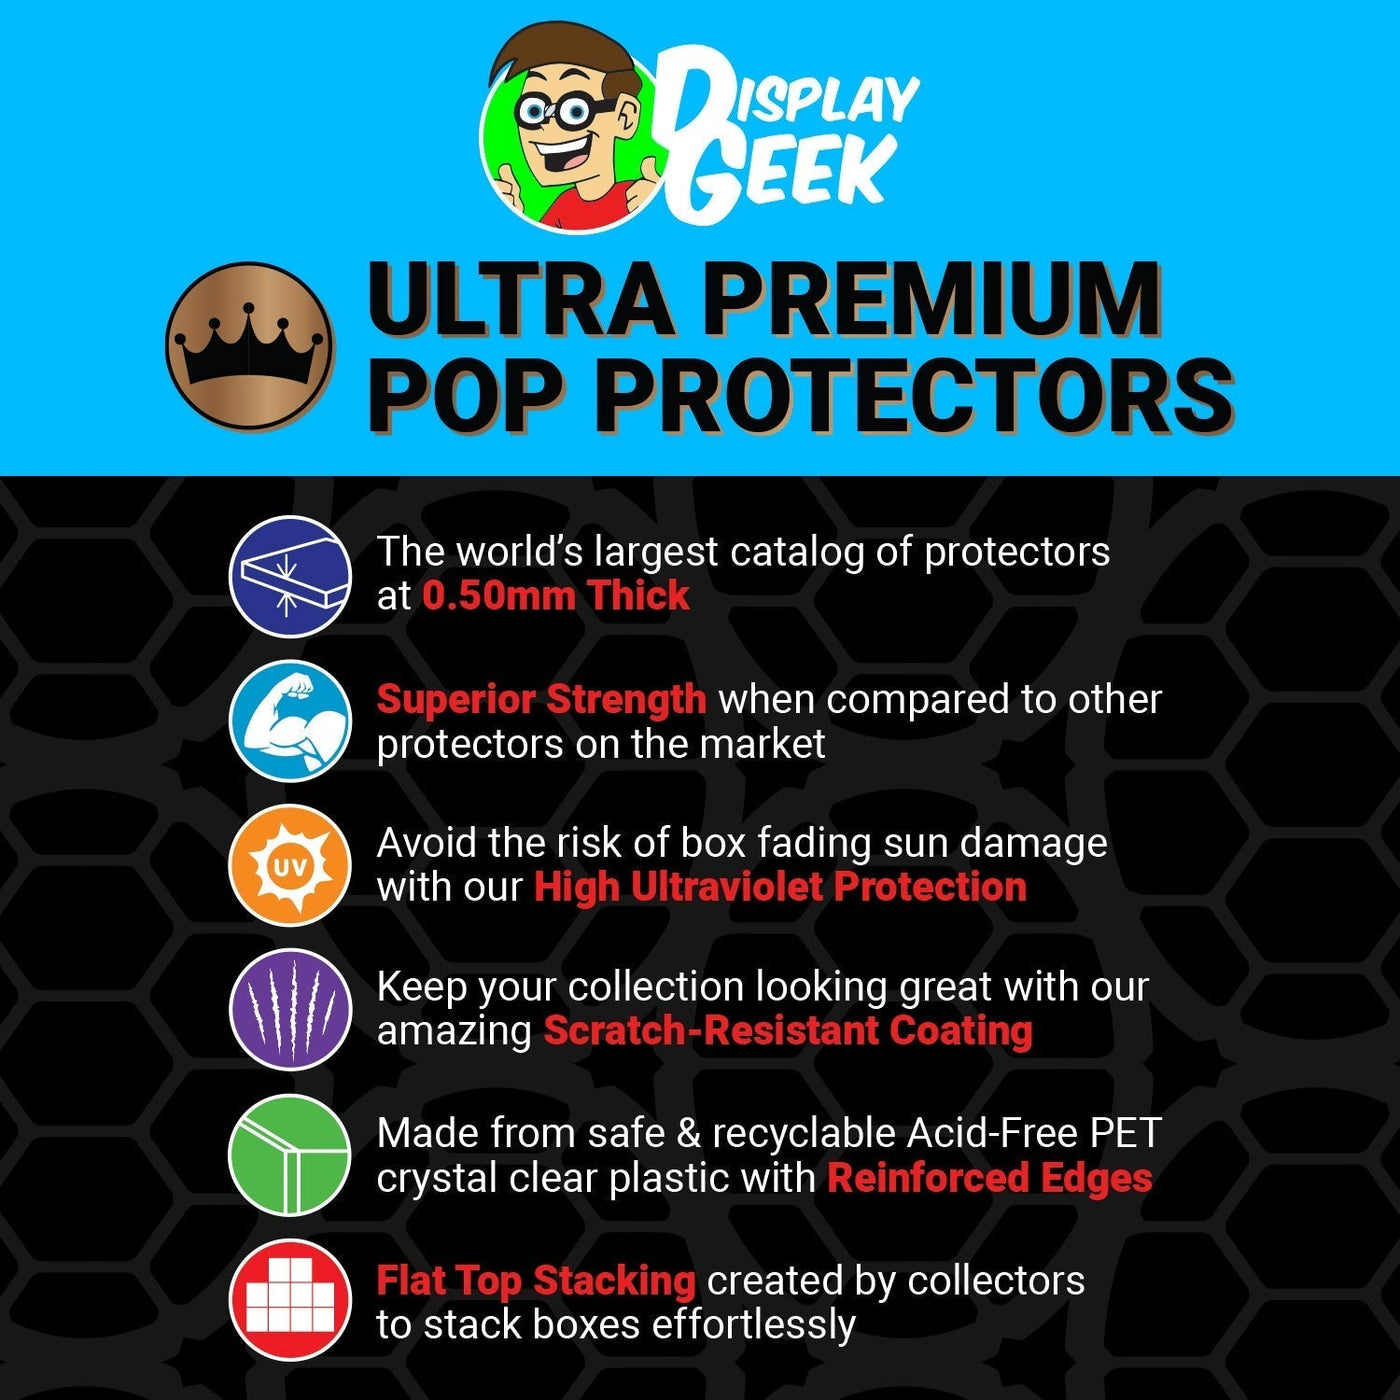 Pop Protector for Vynl 2 Pack Chewbacca & C-3PO Funko on The Protector Guide App by Display Geek